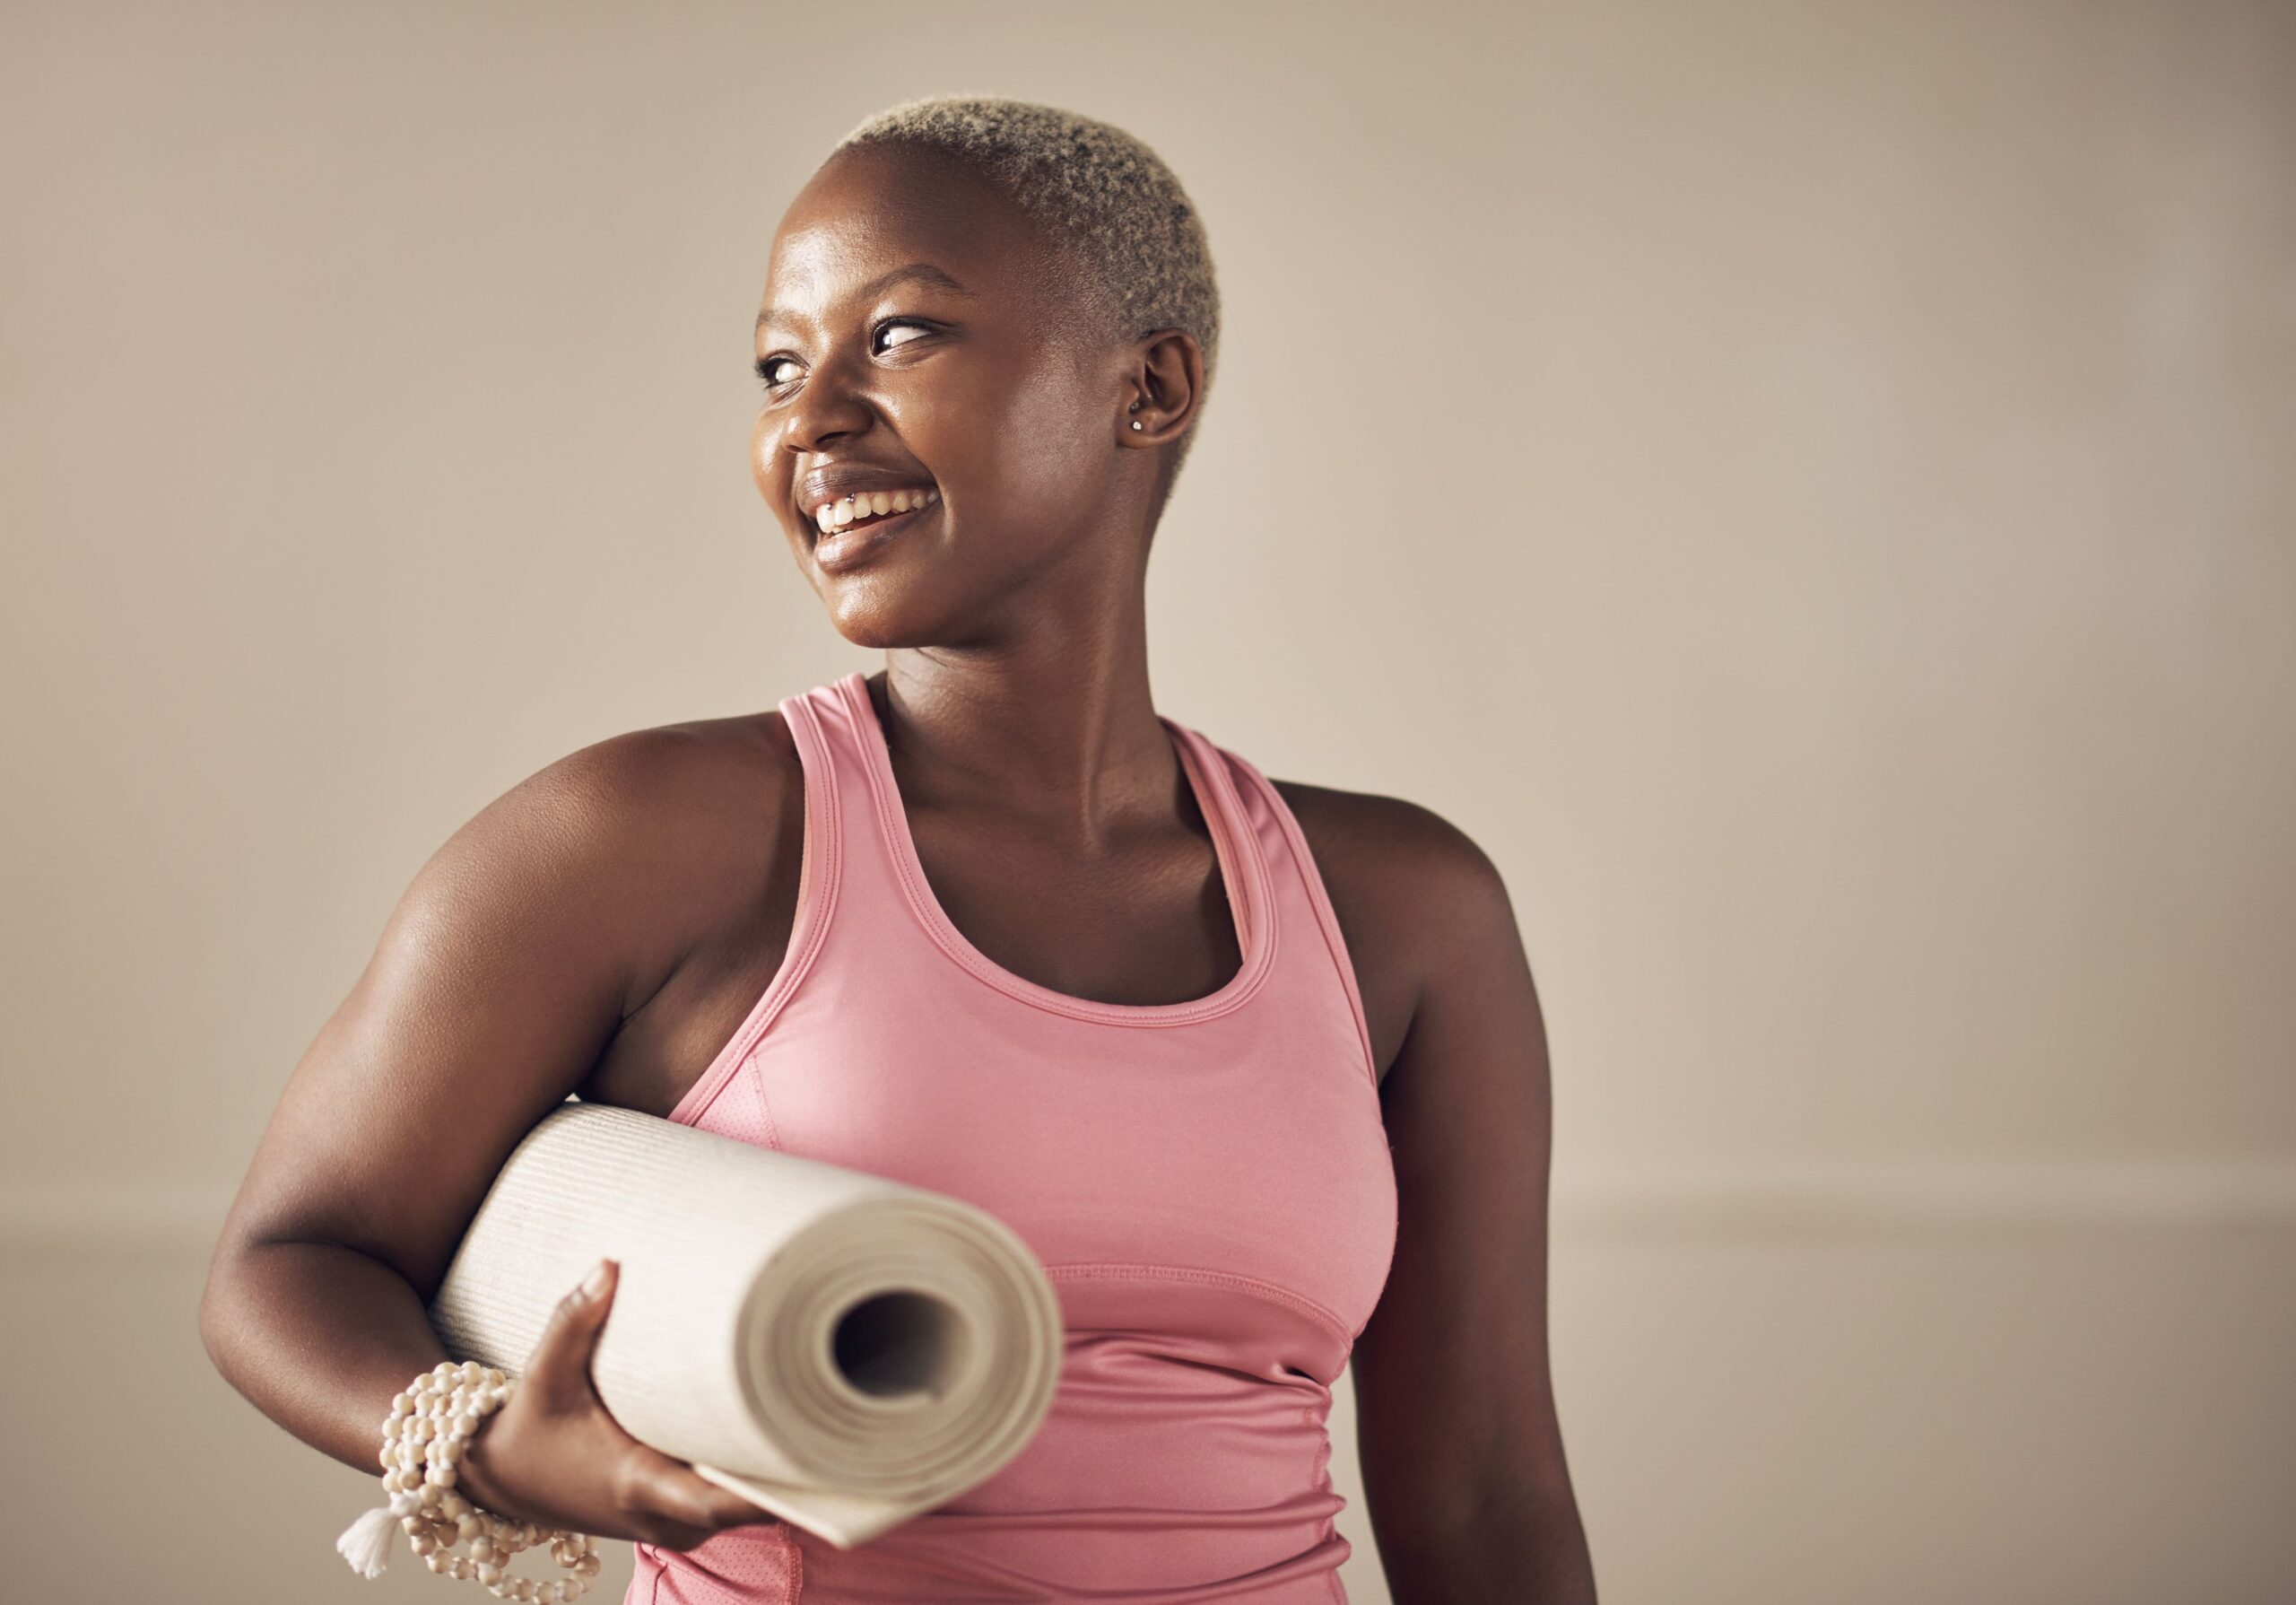 Woman smiling and holding a yoga mat